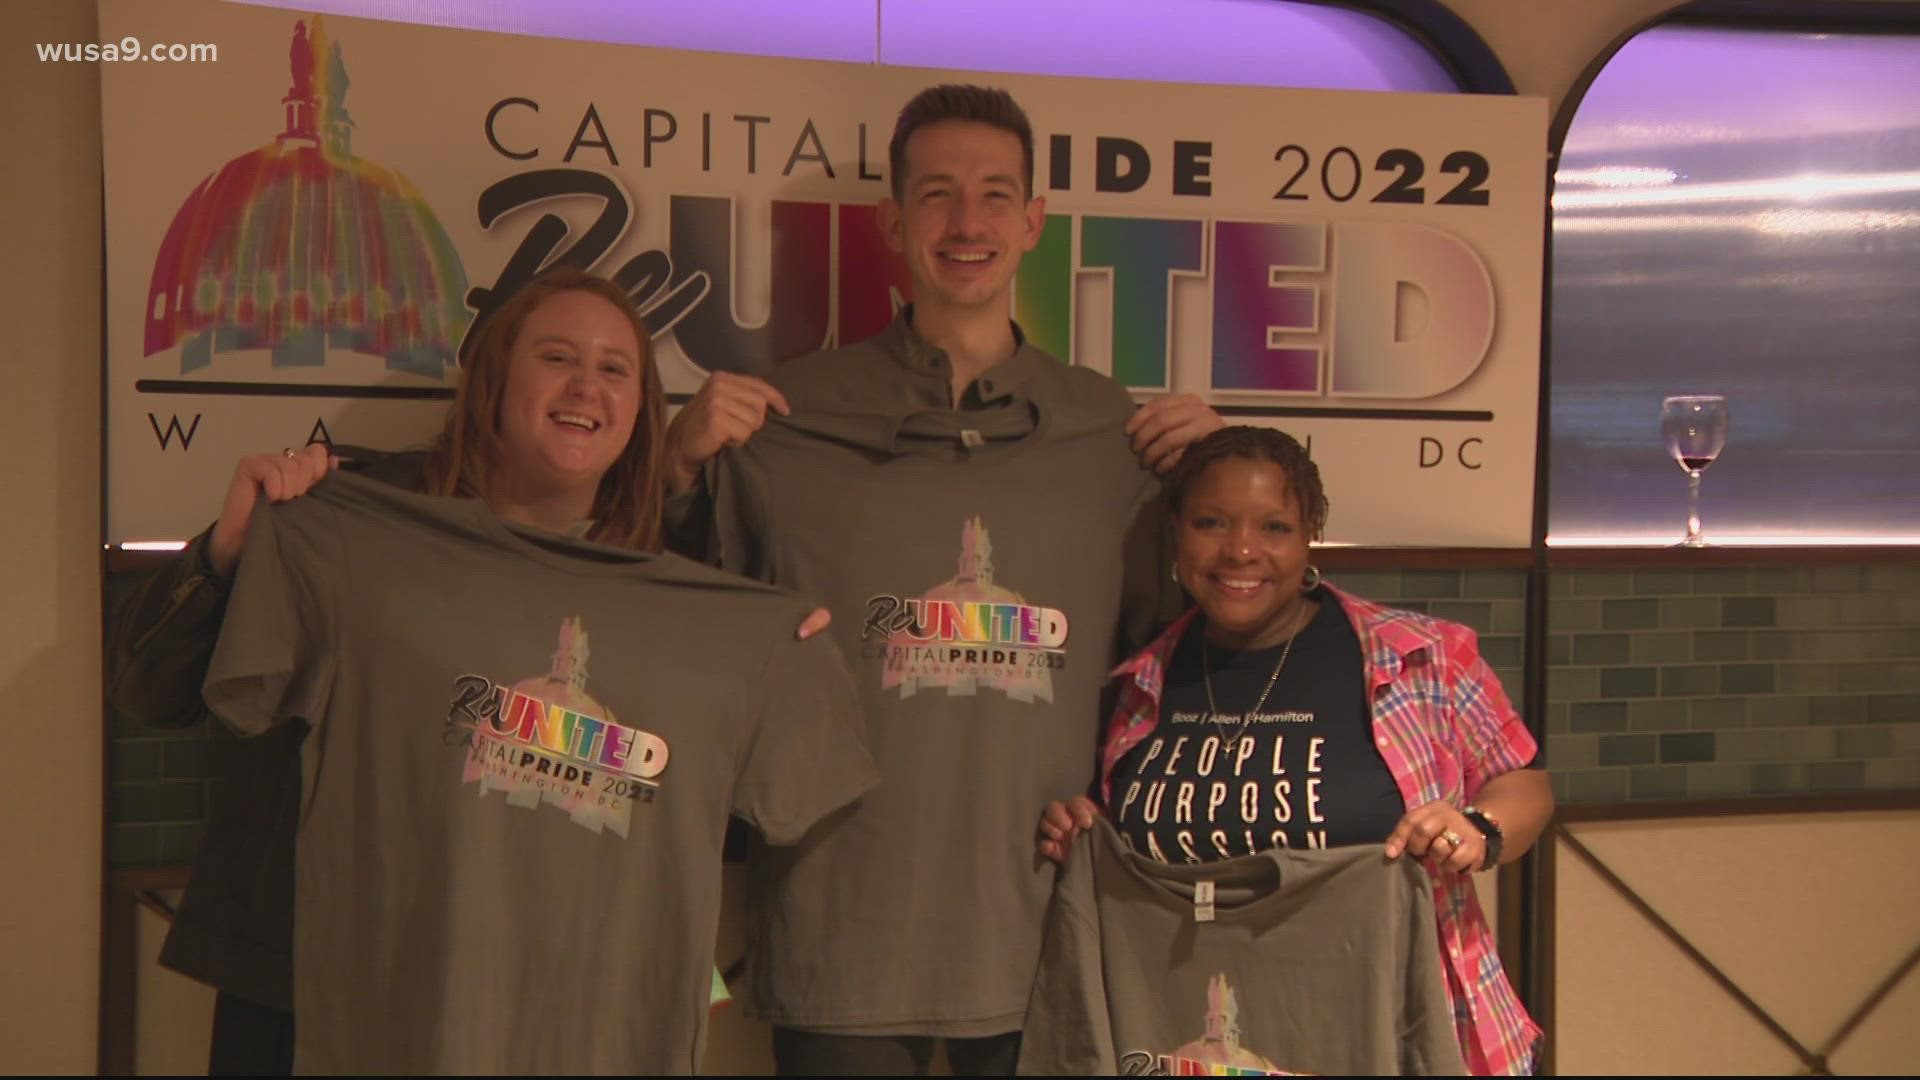 WUSA9 was there for the Capital Pride Alliance's big reveal after not having it's parade for two years because of the pandemic.